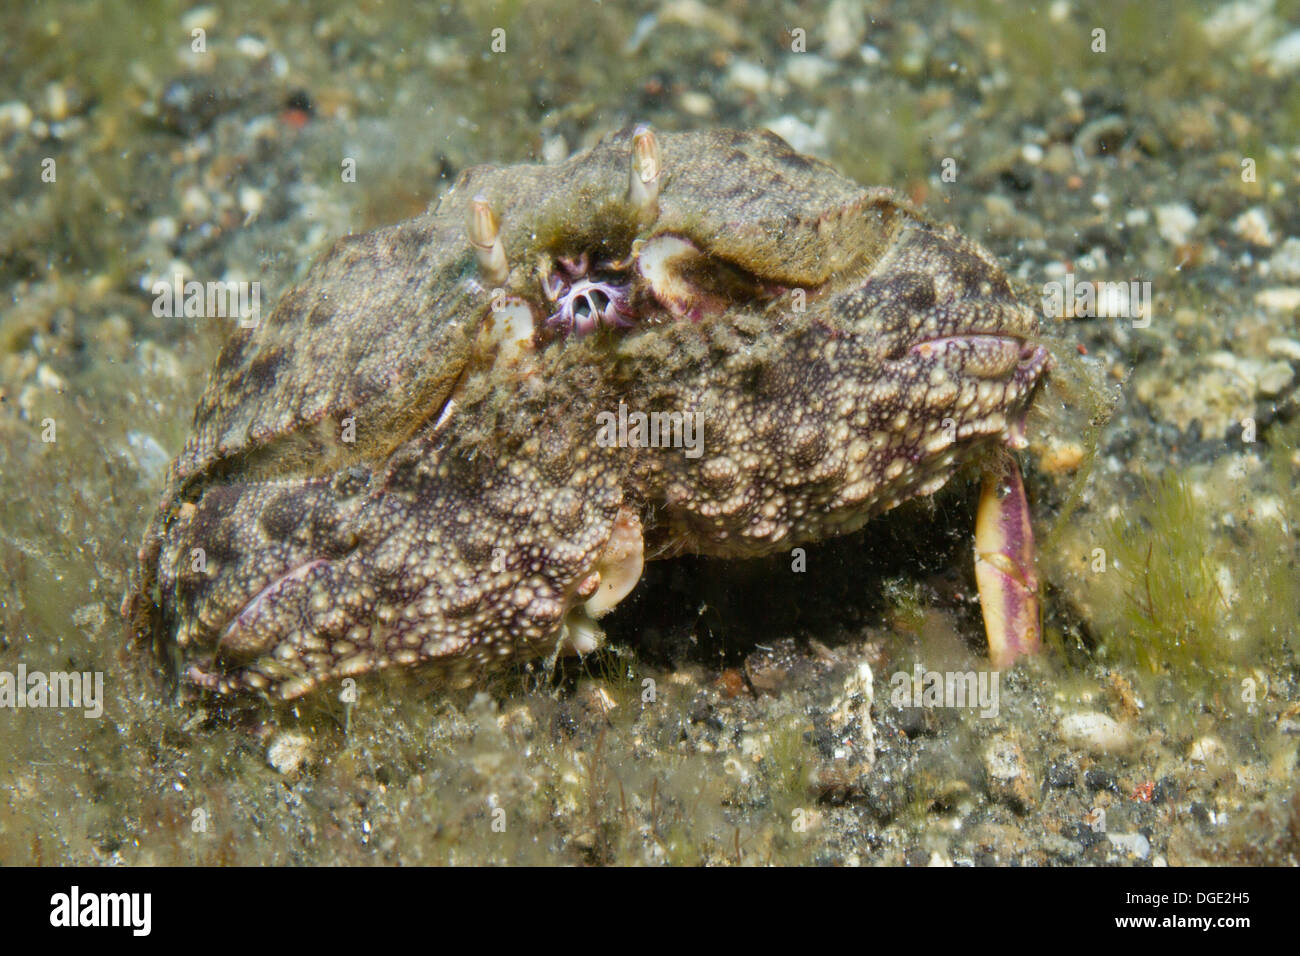 Long-Eyed Box Carb.(Calappa hepatica).Lembeh Straits,Indonesia Stock Photo